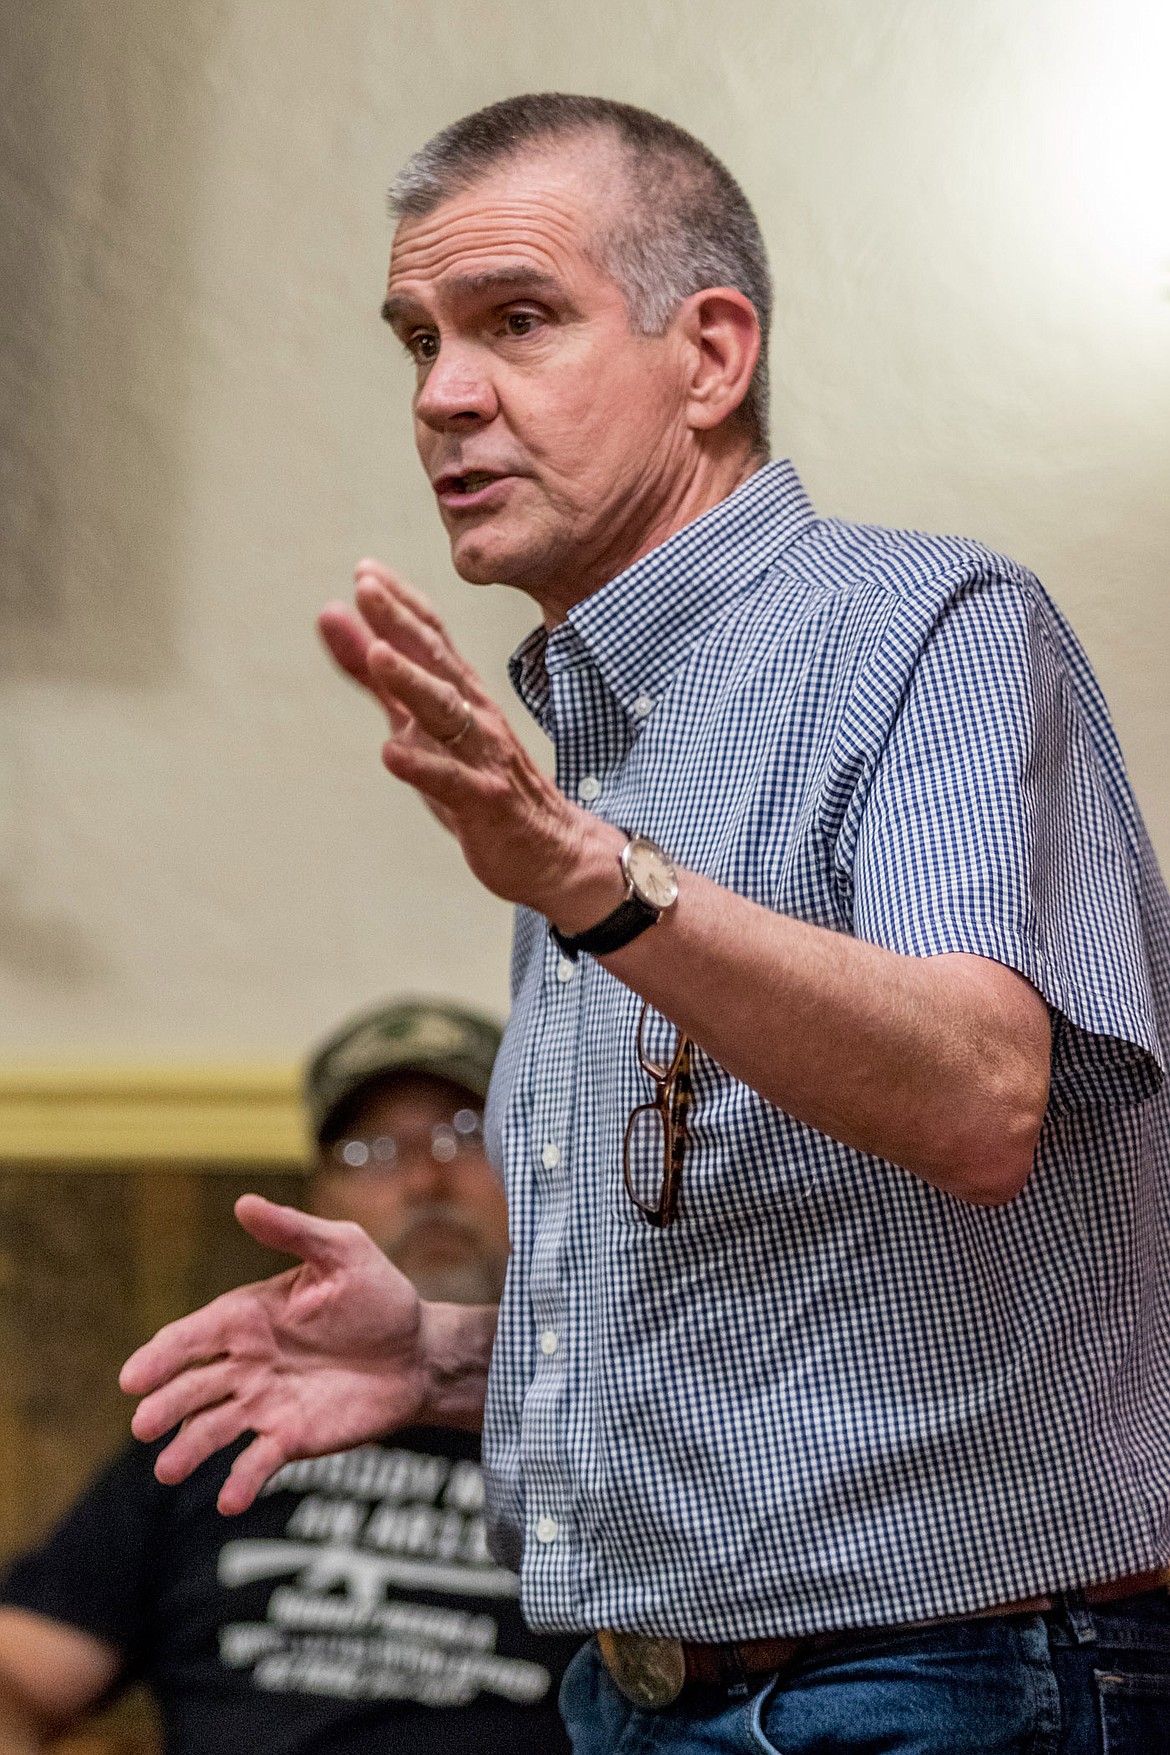 Matt Rosendale, a Republican running to represent Montana in the U.S. Senate, speaks at a meet-and-greet event at the Venture Inn in Libby Friday, Aug. 10, 2018. (John Blodgett/The Western News)